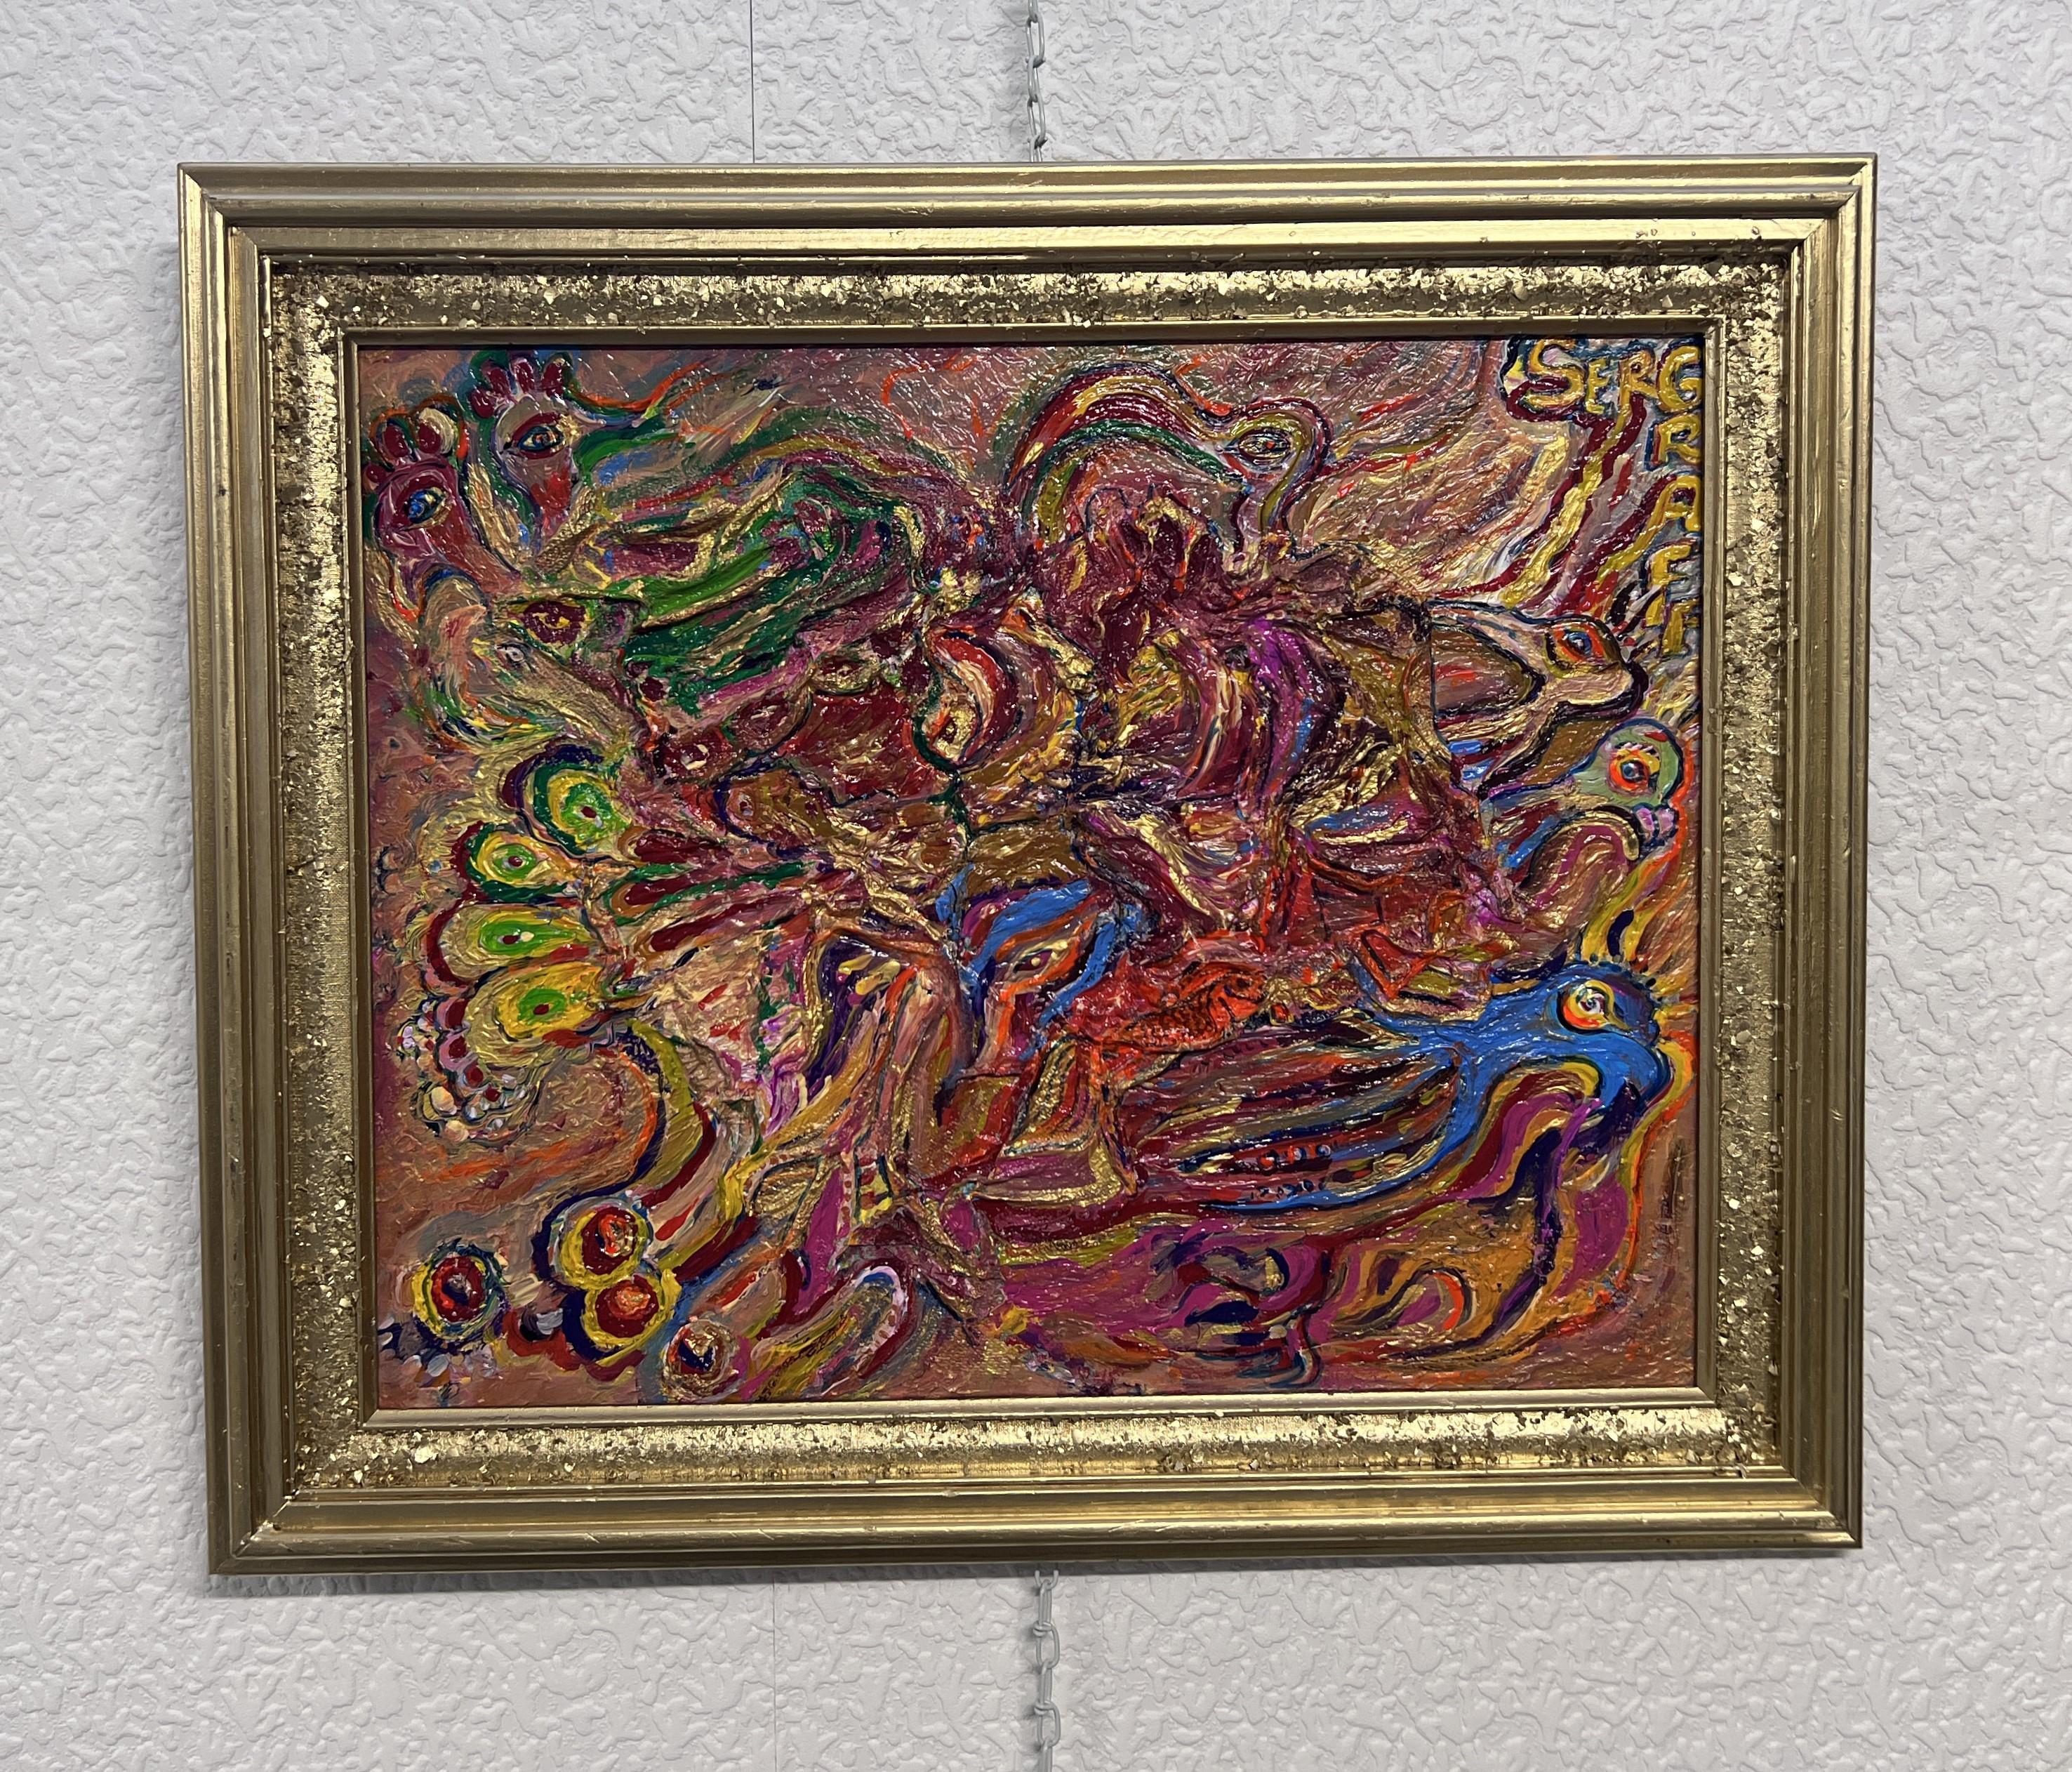 Original Painting on Canvas in a Fantasy Abstract Style by Serg Graff 